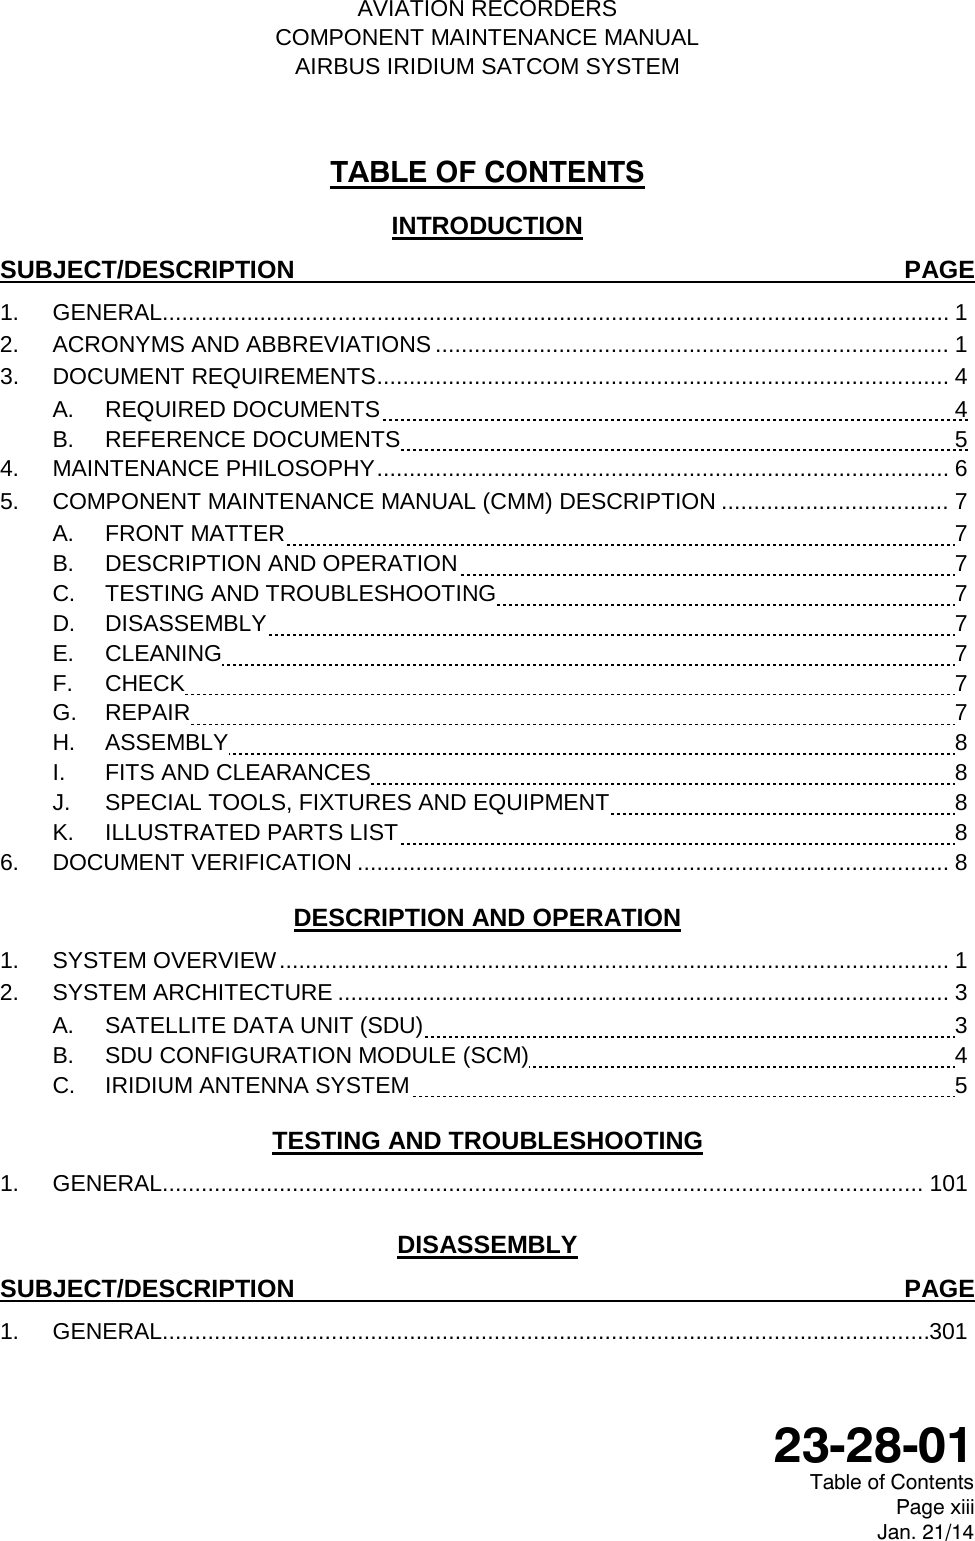   AVIATION RECORDERS COMPONENT MAINTENANCE MANUAL AIRBUS IRIDIUM SATCOM SYSTEM TABLE OF CONTENTS INTRODUCTION SUBJECT/DESCRIPTION PAGE 1. GENERAL......................................................................................................................... 1 2. ACRONYMS AND ABBREVIATIONS ............................................................................... 1 3. DOCUMENT REQUIREMENTS ........................................................................................ 4 A. REQUIRED DOCUMENTS  4 B.  REFERENCE DOCUMENTS  5 4. MAINTENANCE PHILOSOPHY ........................................................................................ 6 5. COMPONENT MAINTENANCE MANUAL (CMM) DESCRIPTION ................................... 7 A. FRONT MATTER  7 B. DESCRIPTION AND OPERATION  7 C. TESTING AND TROUBLESHOOTING  7 D.  DISASSEMBLY  7 E.  CLEANING  7 F.  CHECK  7 G.  REPAIR  7 H.  ASSEMBLY  8 I.  FITS AND CLEARANCES  8 J.  SPECIAL TOOLS, FIXTURES AND EQUIPMENT  8 K.  ILLUSTRATED PARTS LIST  8 6. DOCUMENT VERIFICATION ........................................................................................... 8 DESCRIPTION AND OPERATION 1. SYSTEM OVERVIEW ....................................................................................................... 1 2. SYSTEM ARCHITECTURE .............................................................................................. 3 A. SATELLITE DATA UNIT (SDU)  3 B. SDU CONFIGURATION MODULE (SCM)  4 C.  IRIDIUM ANTENNA SYSTEM  5 TESTING AND TROUBLESHOOTING 1. GENERAL.....................................................................................................................  101 DISASSEMBLY SUBJECT/DESCRIPTION PAGE 1. GENERAL...................................................................................................................... 301  23-28-01 Table of Contents Page xiii Jan. 21/14 